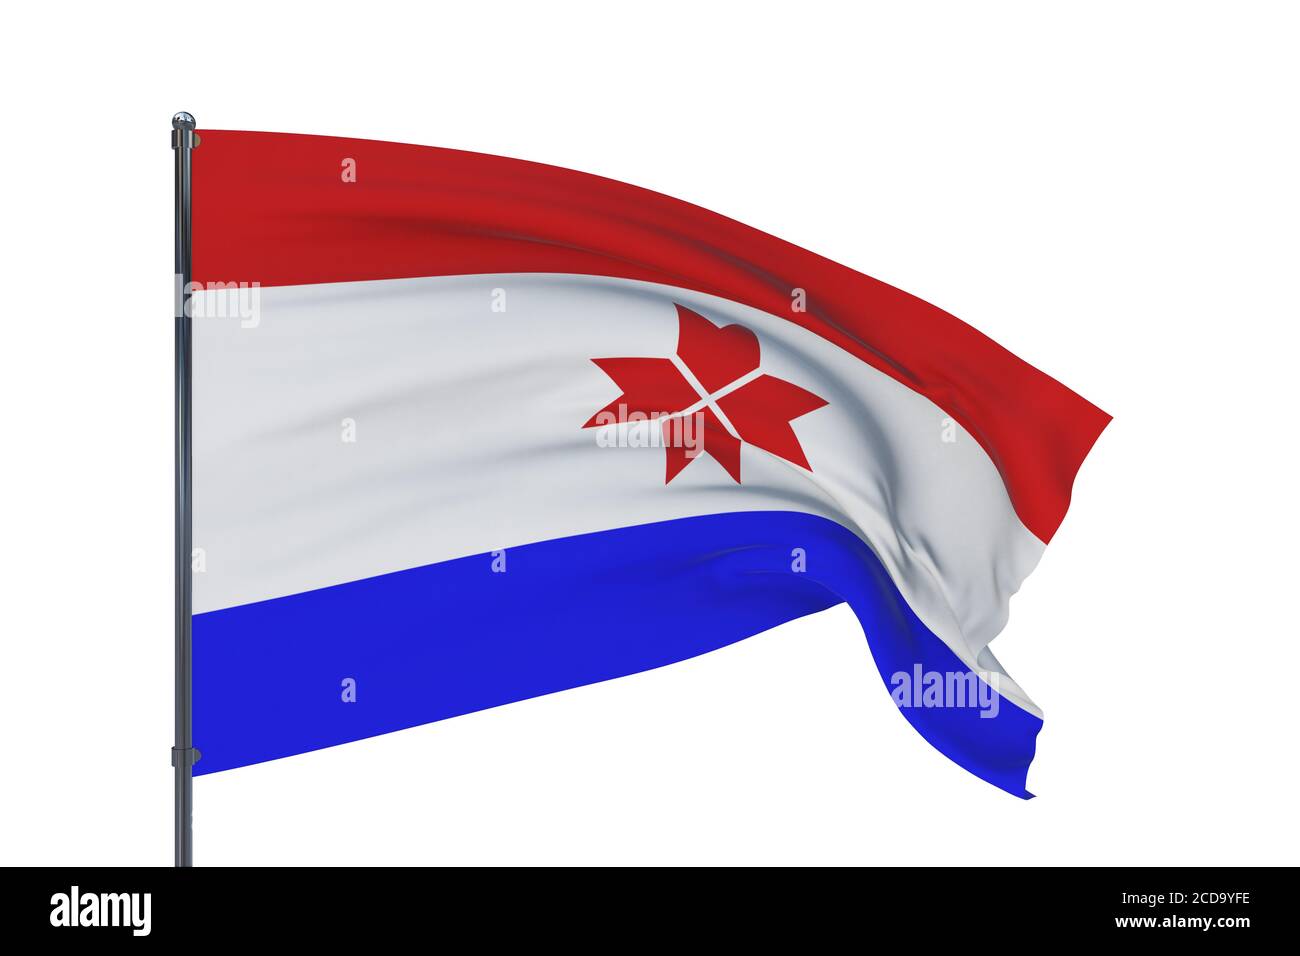 Flag of Mordovia. 3D illustration isolated on white background. Flags of the federal subjects of Russia. Stock Photo